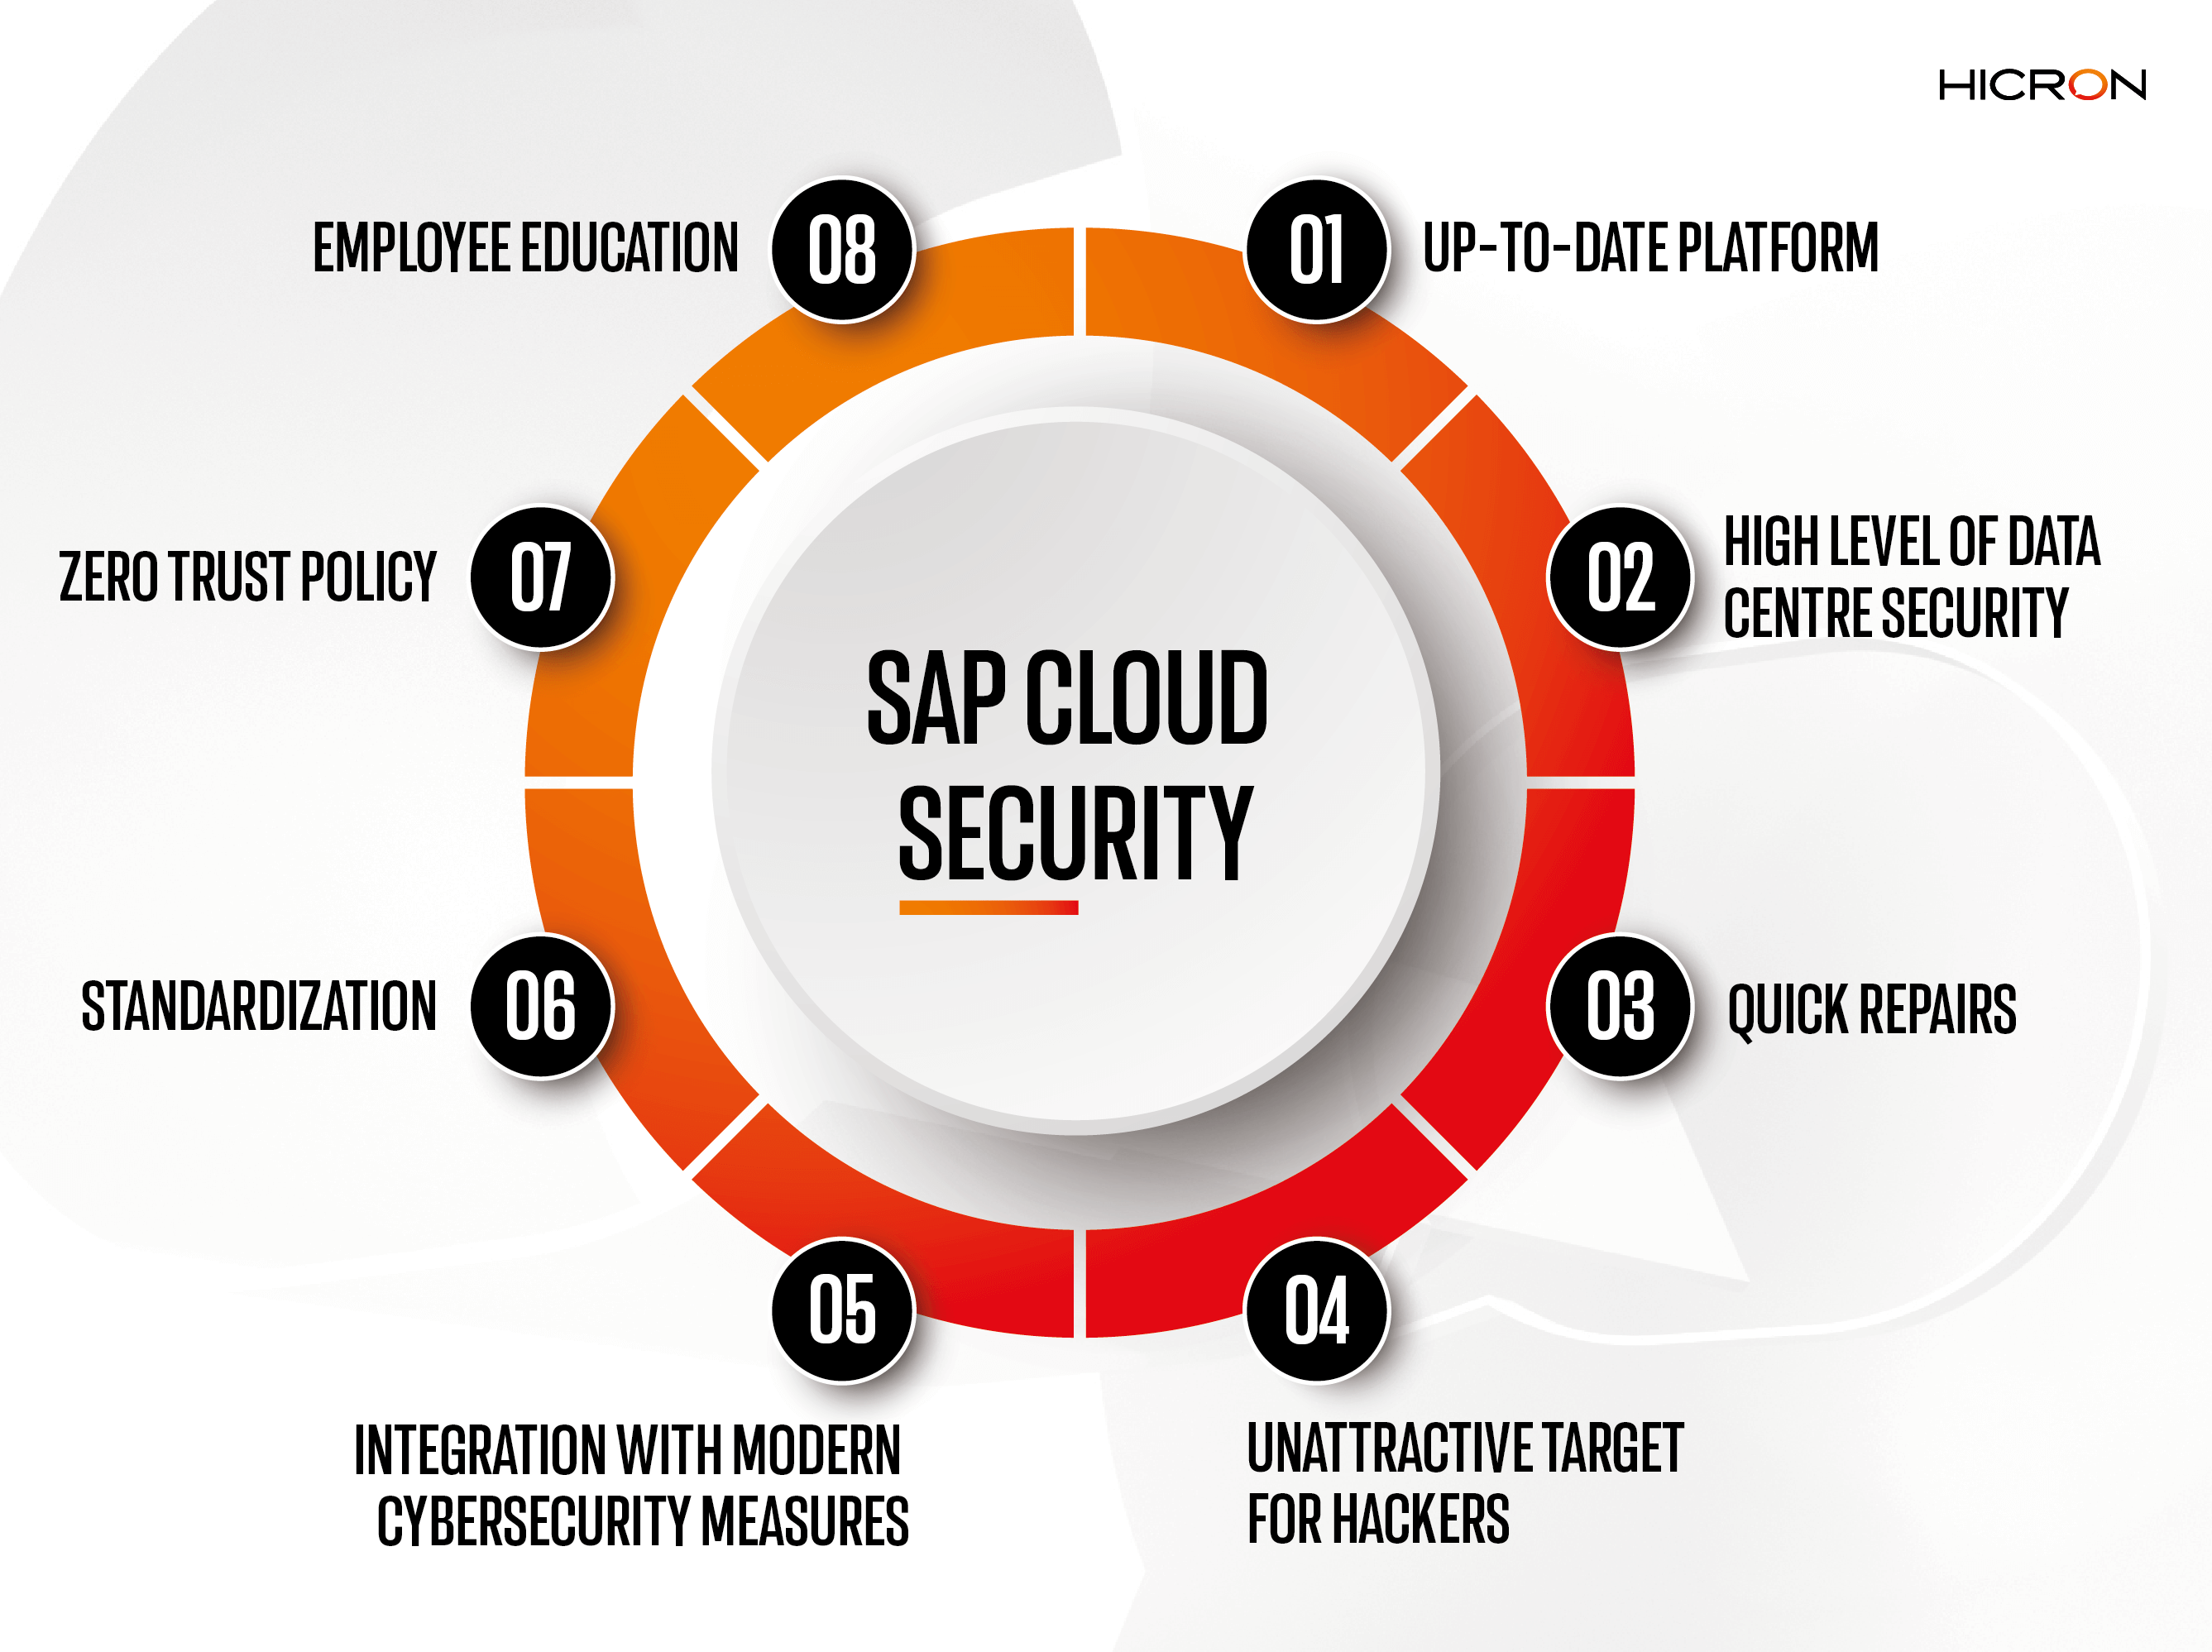 How secure is the SAP Cloud?